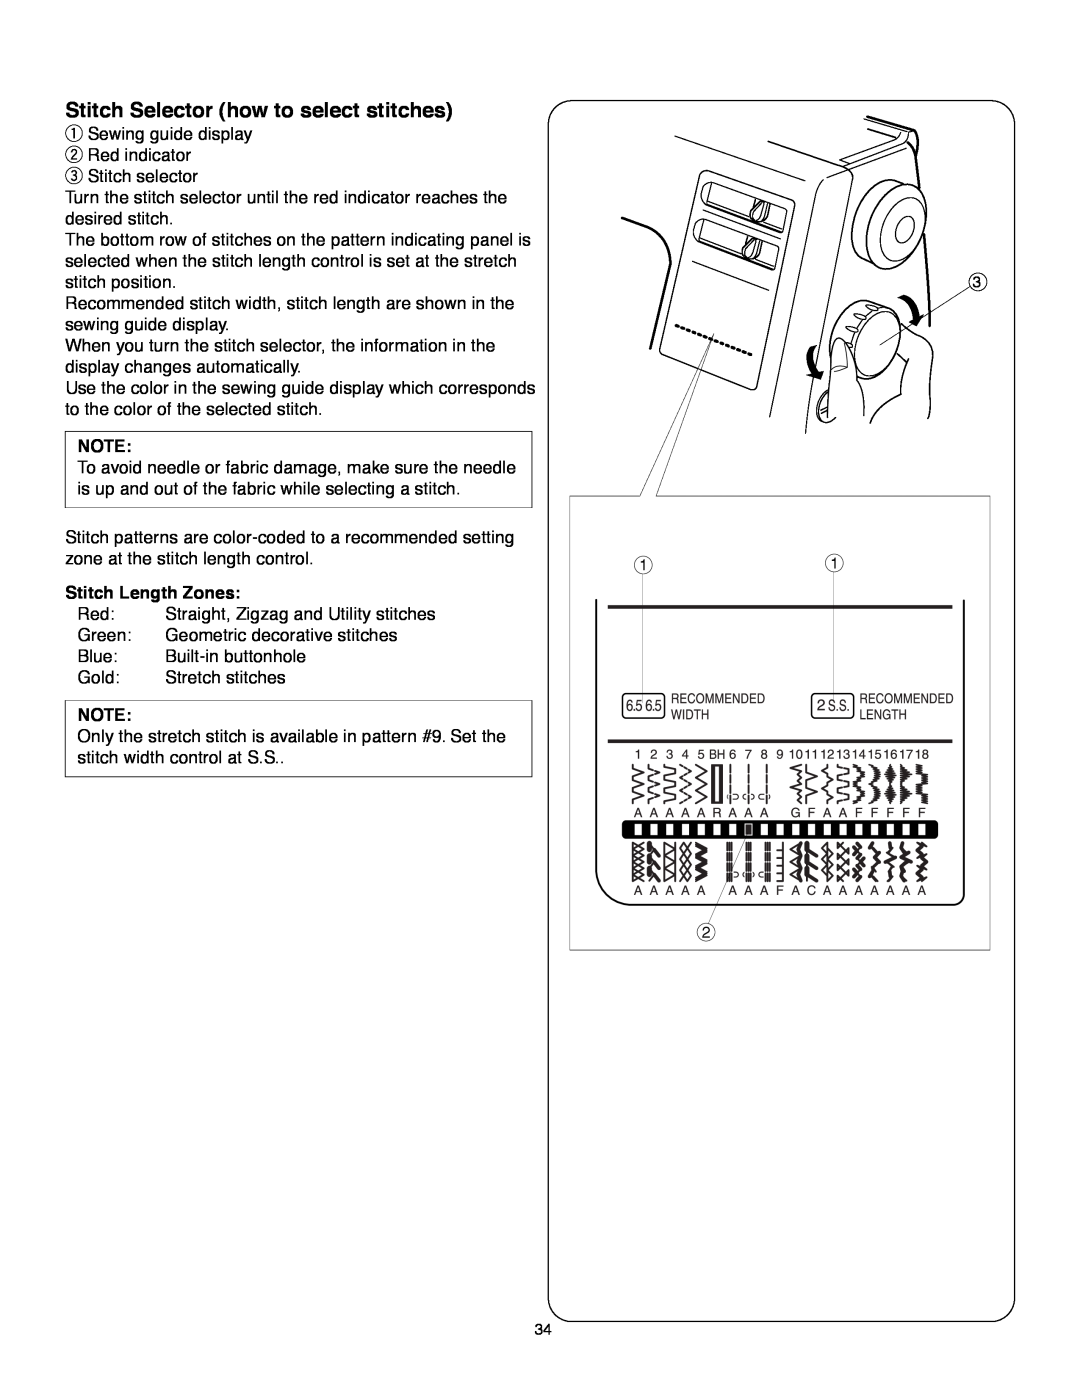 Janome MS-5027 instruction manual Stitch Selector how to select stitches, Stitch Length Zones 